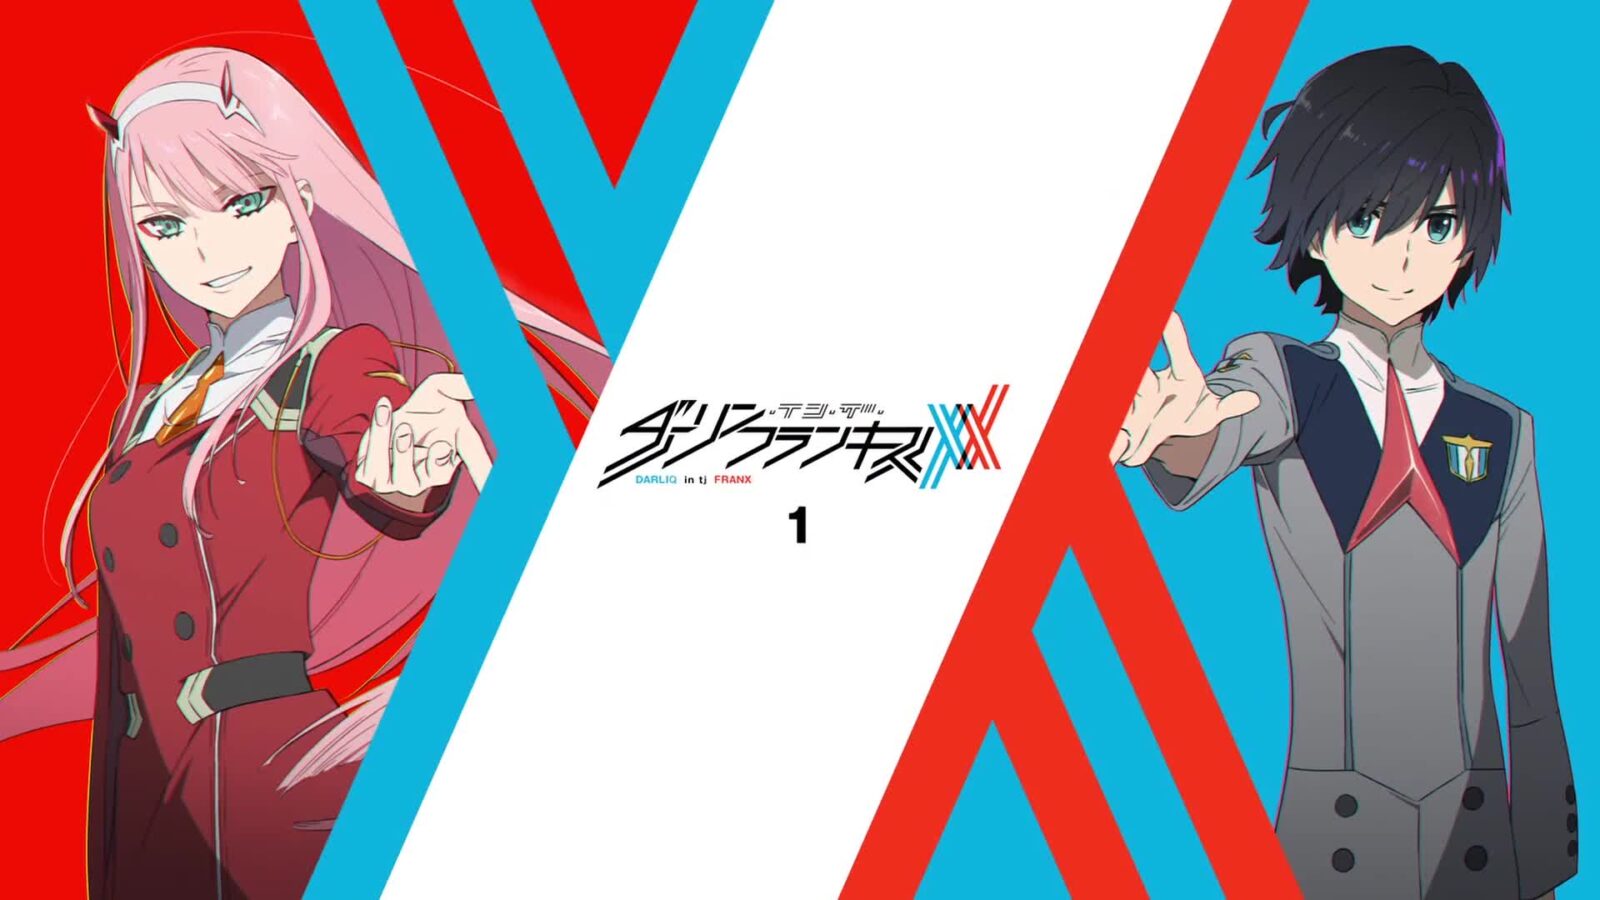 LiveWallpapers4Free.com | Darling In The Franxx Short Intro - Free Live Wallpaper